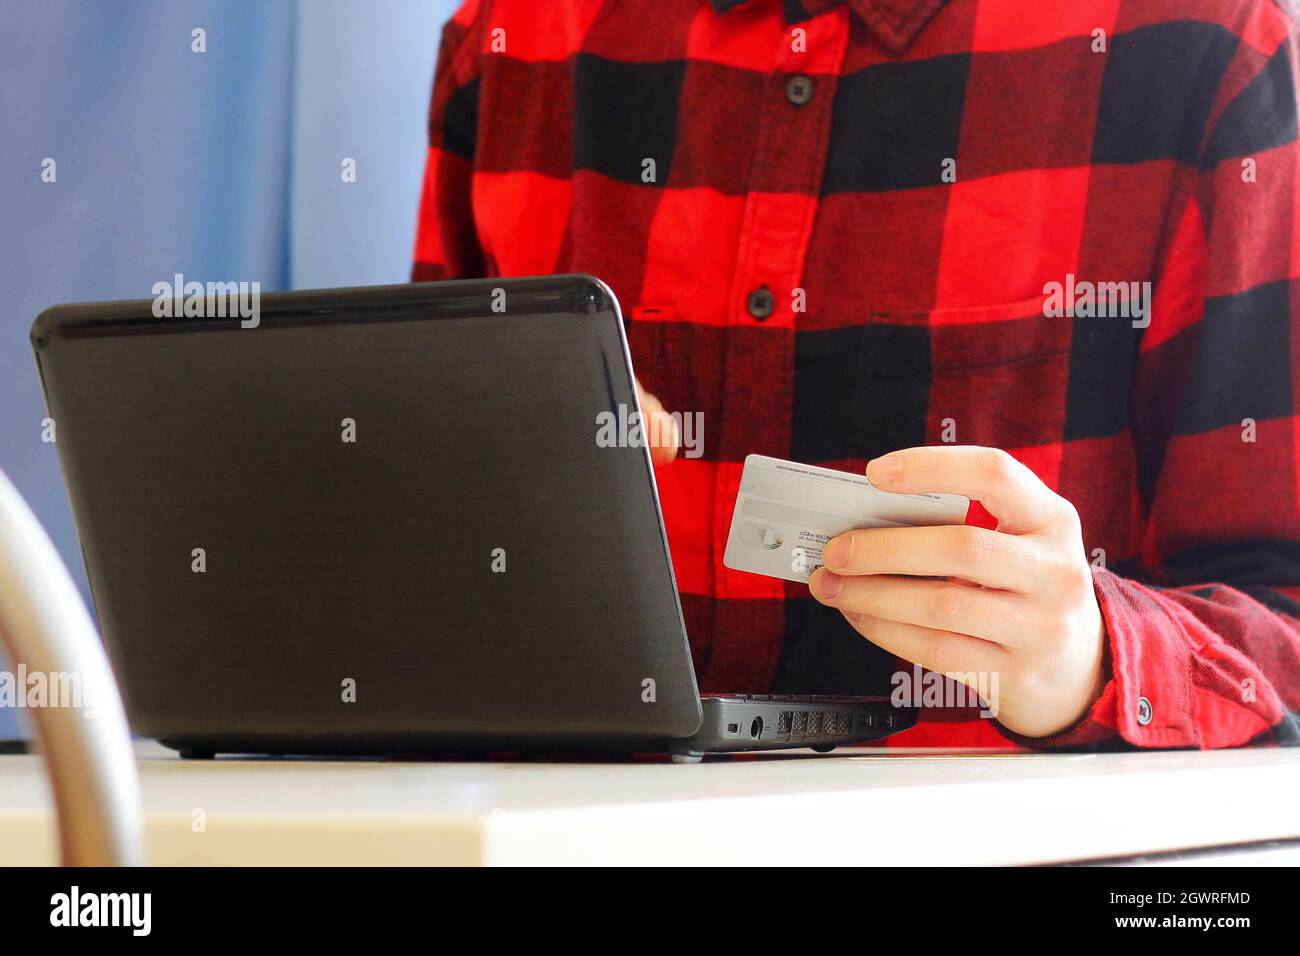 A Person Makes Purchases Using A Laptop And A Bank Credit Card. Online  Shopping Stock Photo - Alamy